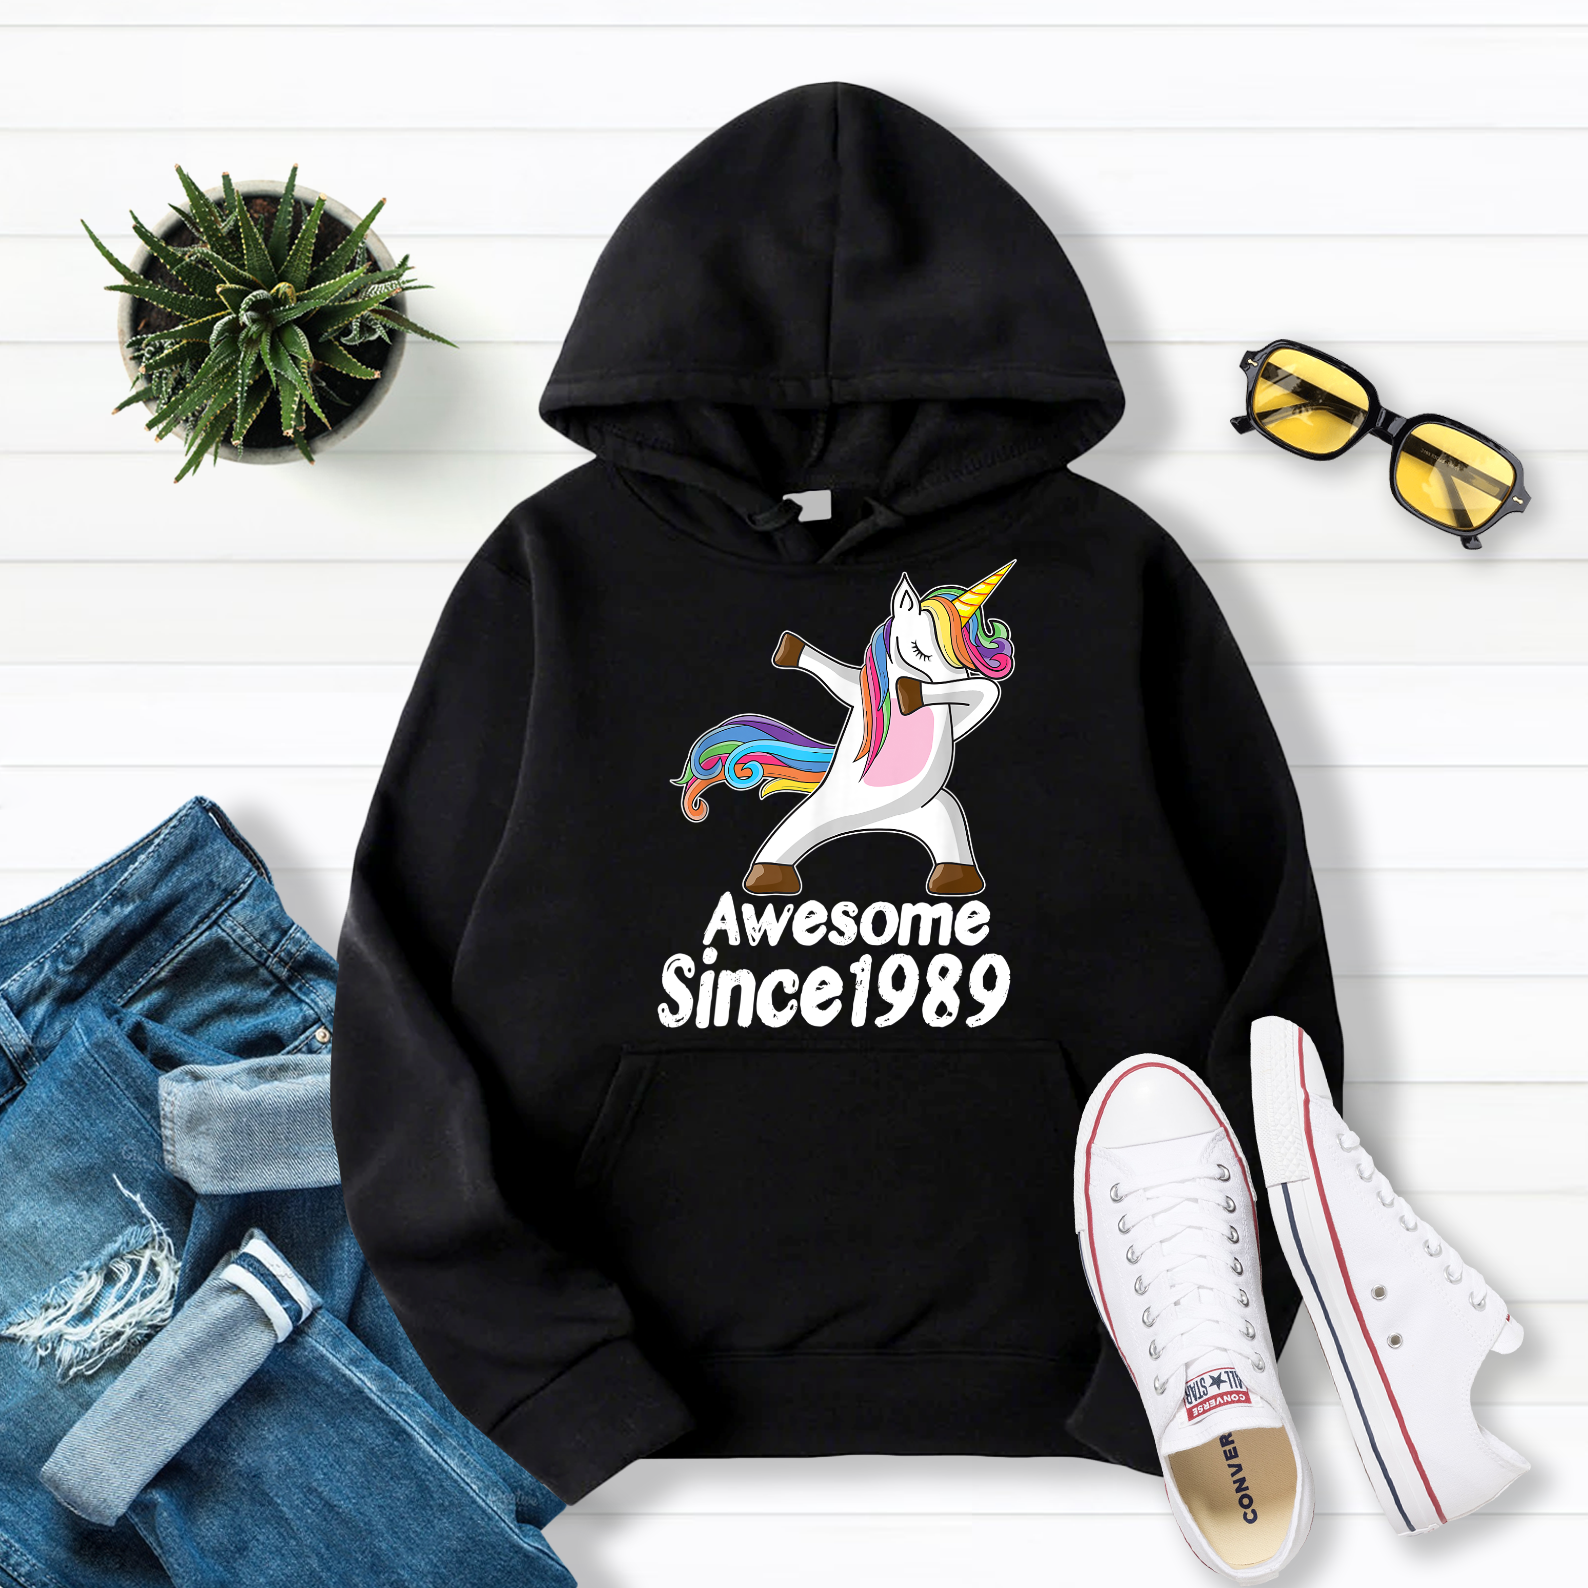 30th Birthday Gift Awesome Since 1989 Unicorn Dabbing Pullover Hoodie Black S-5XL